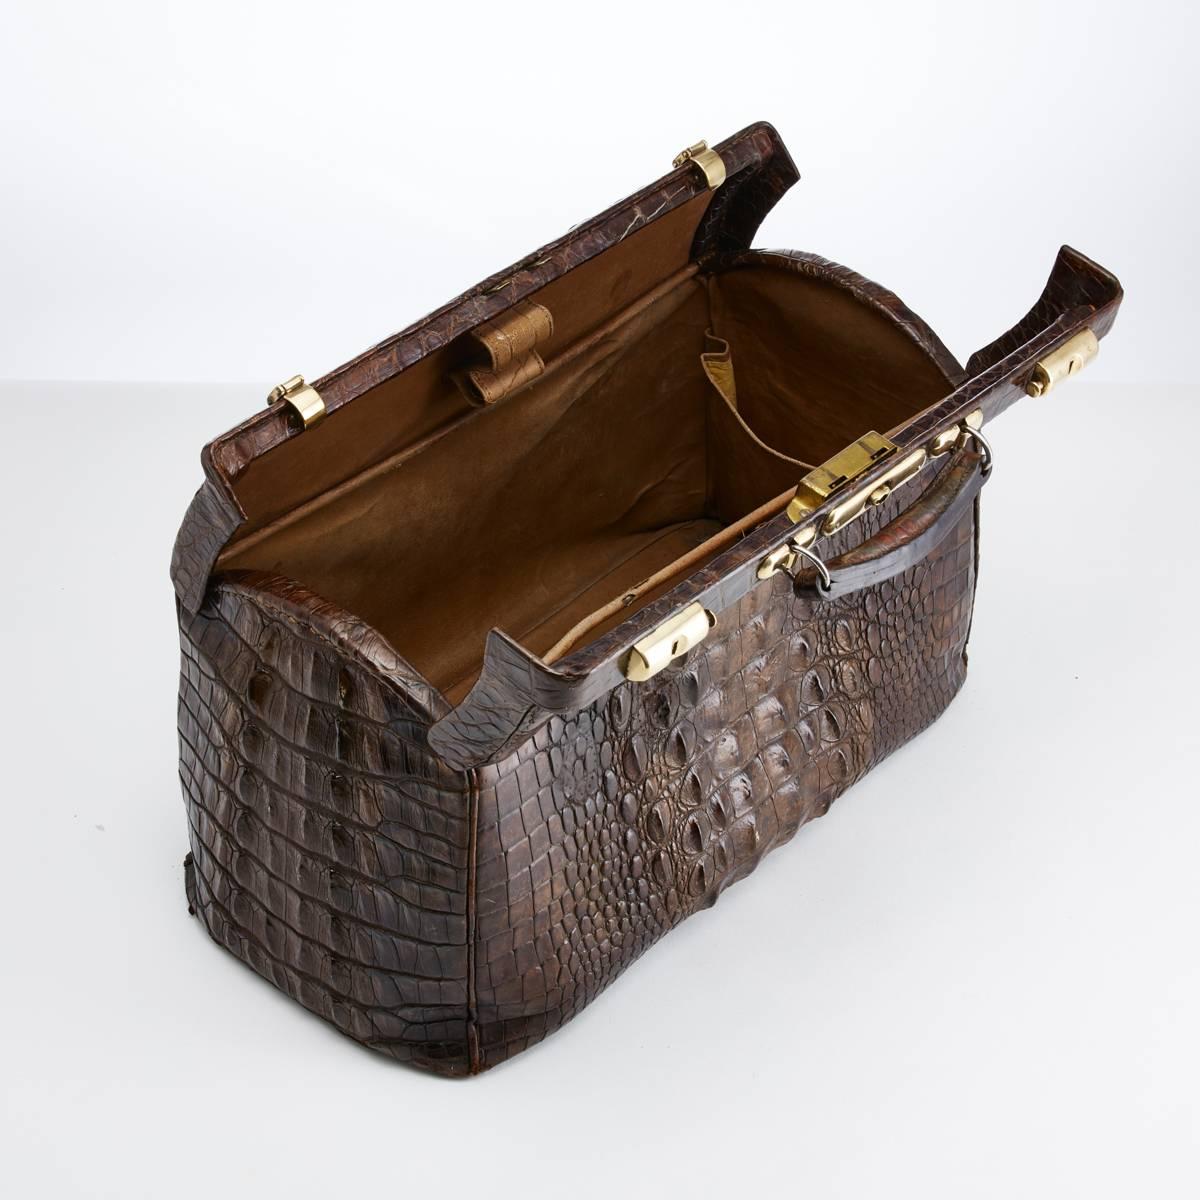 Large early 20th century crocodile gladstone bag,

circa 1910-1915.

This rugged piece of crocodile luggage with raised centre skin is in excellent condition both on the exterior and interior. It was likely to have originally been a customised